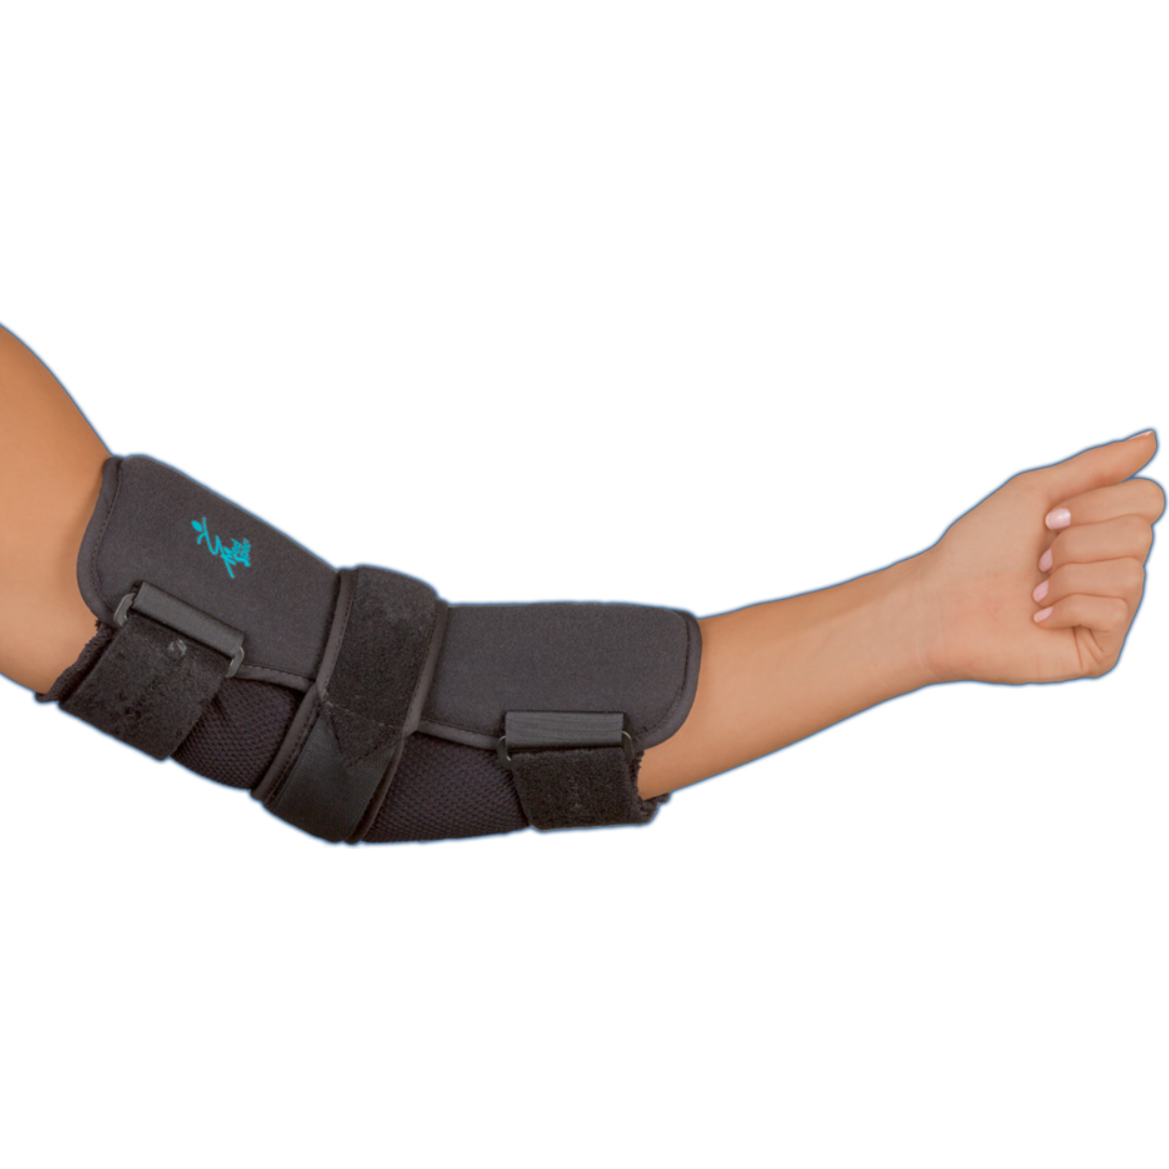 Elbow Brace for Cubital Tunnel Syndrome Adult Elbow Immobilizer